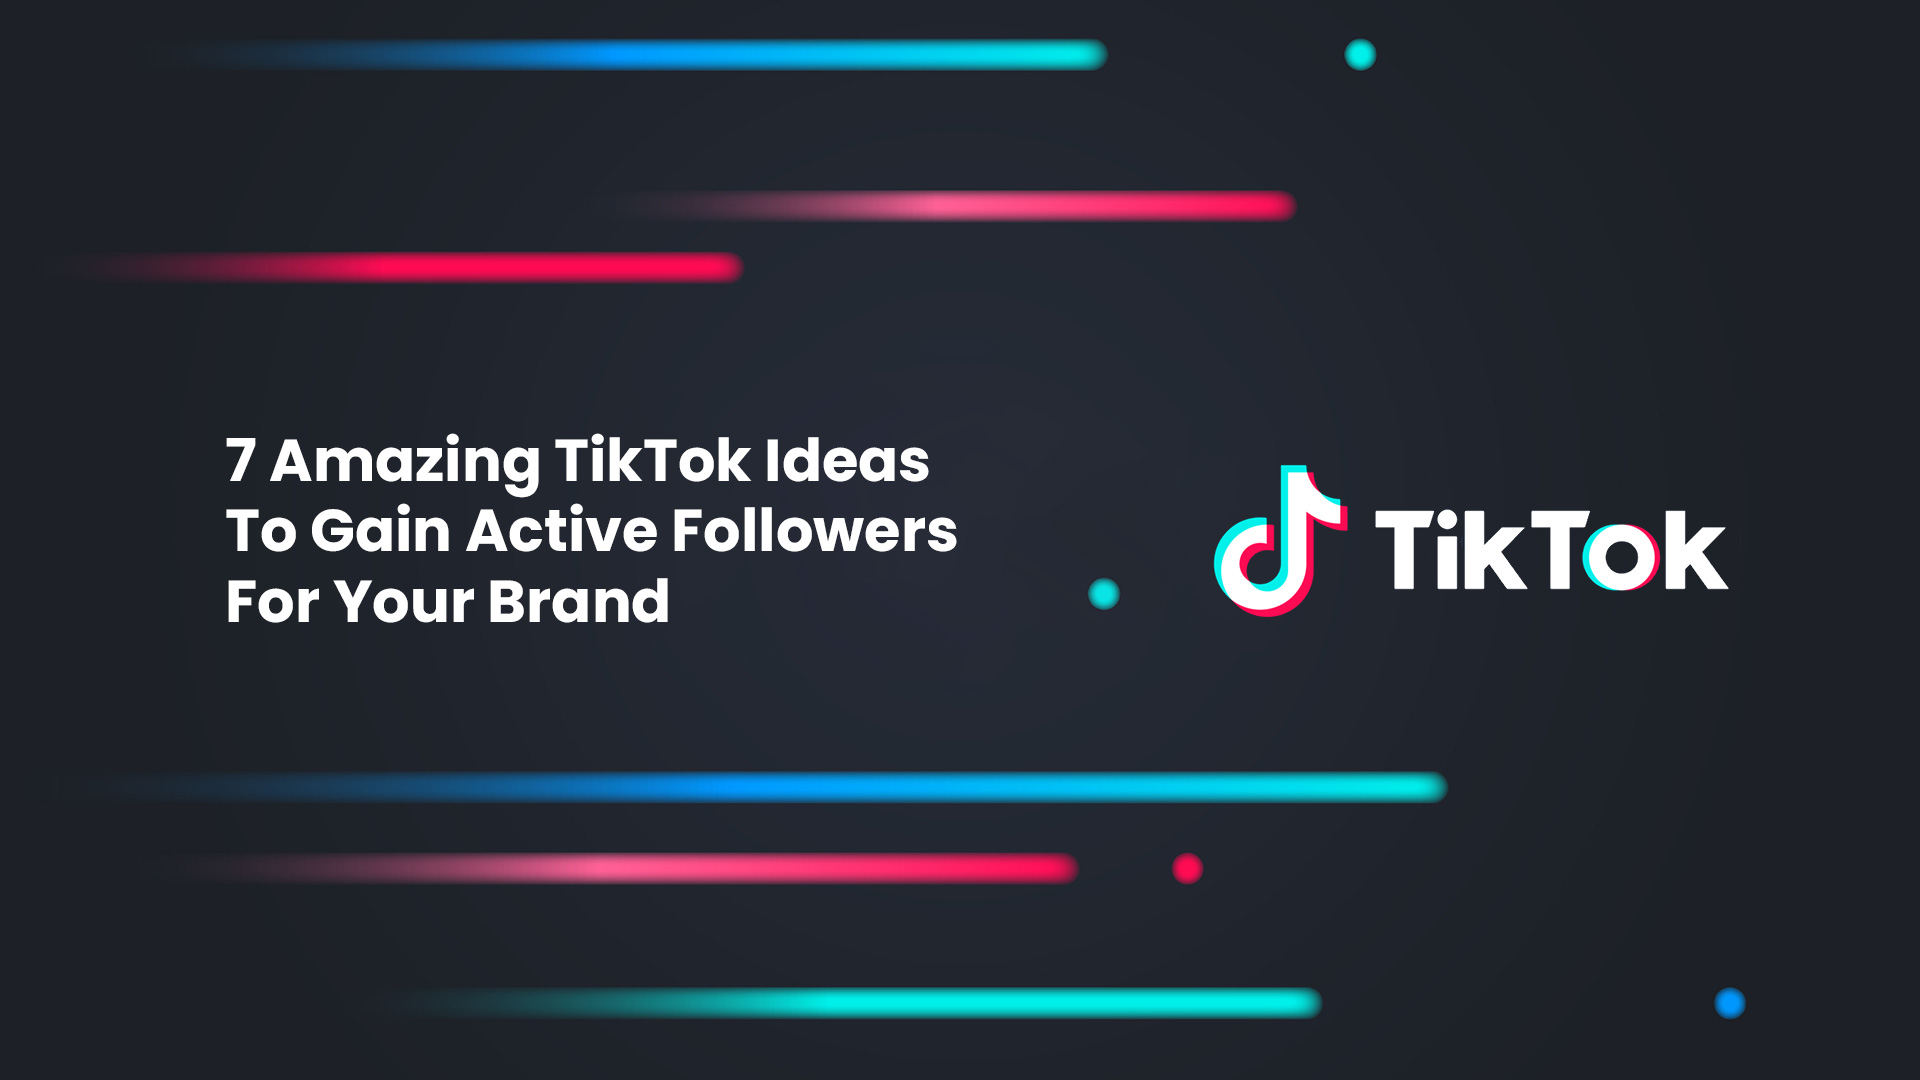 7 Amazing TikTok Ideas To Gain Active Followers For Your Brand